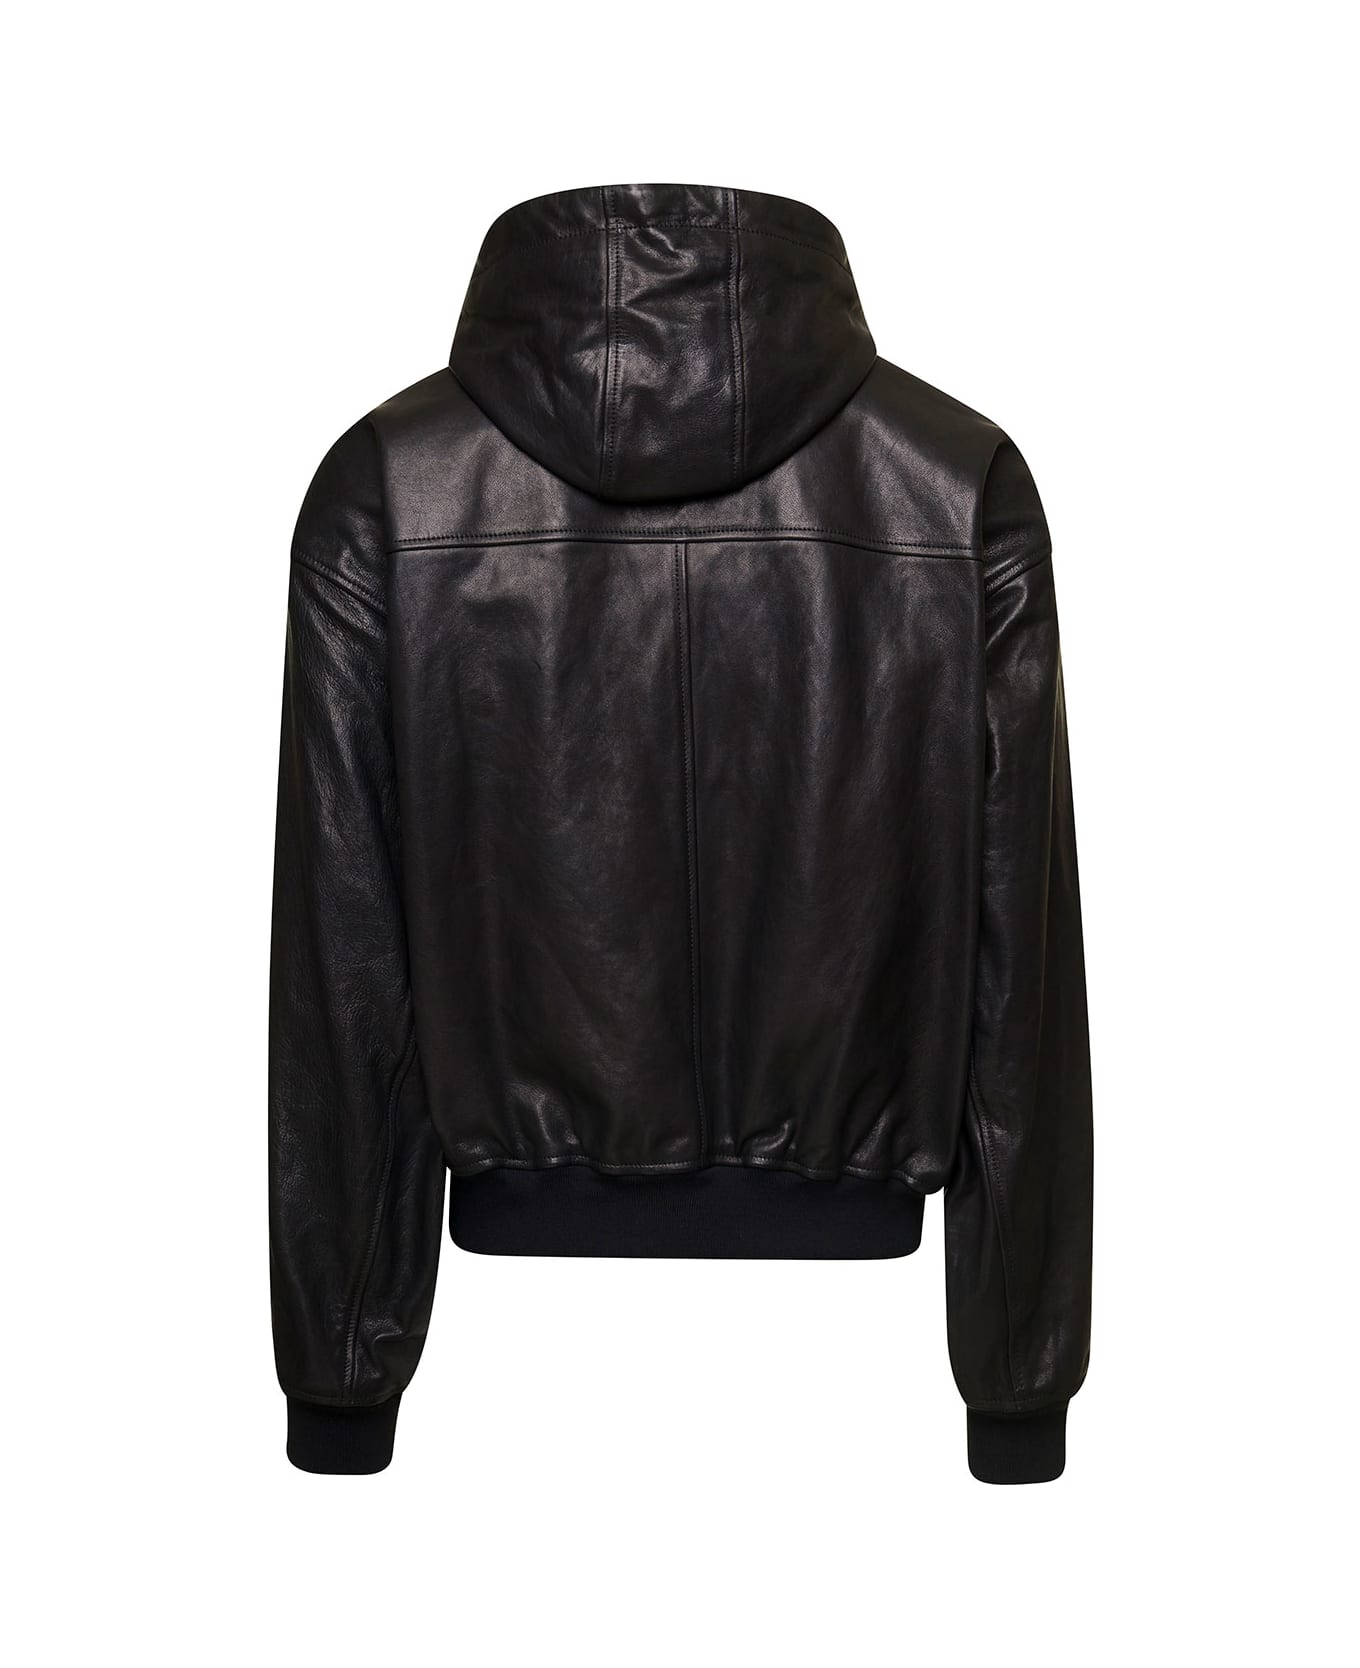 Dolce & Gabbana Black Hooded Bomber Jacket With Metal Logo Tag In Leather Man - Black